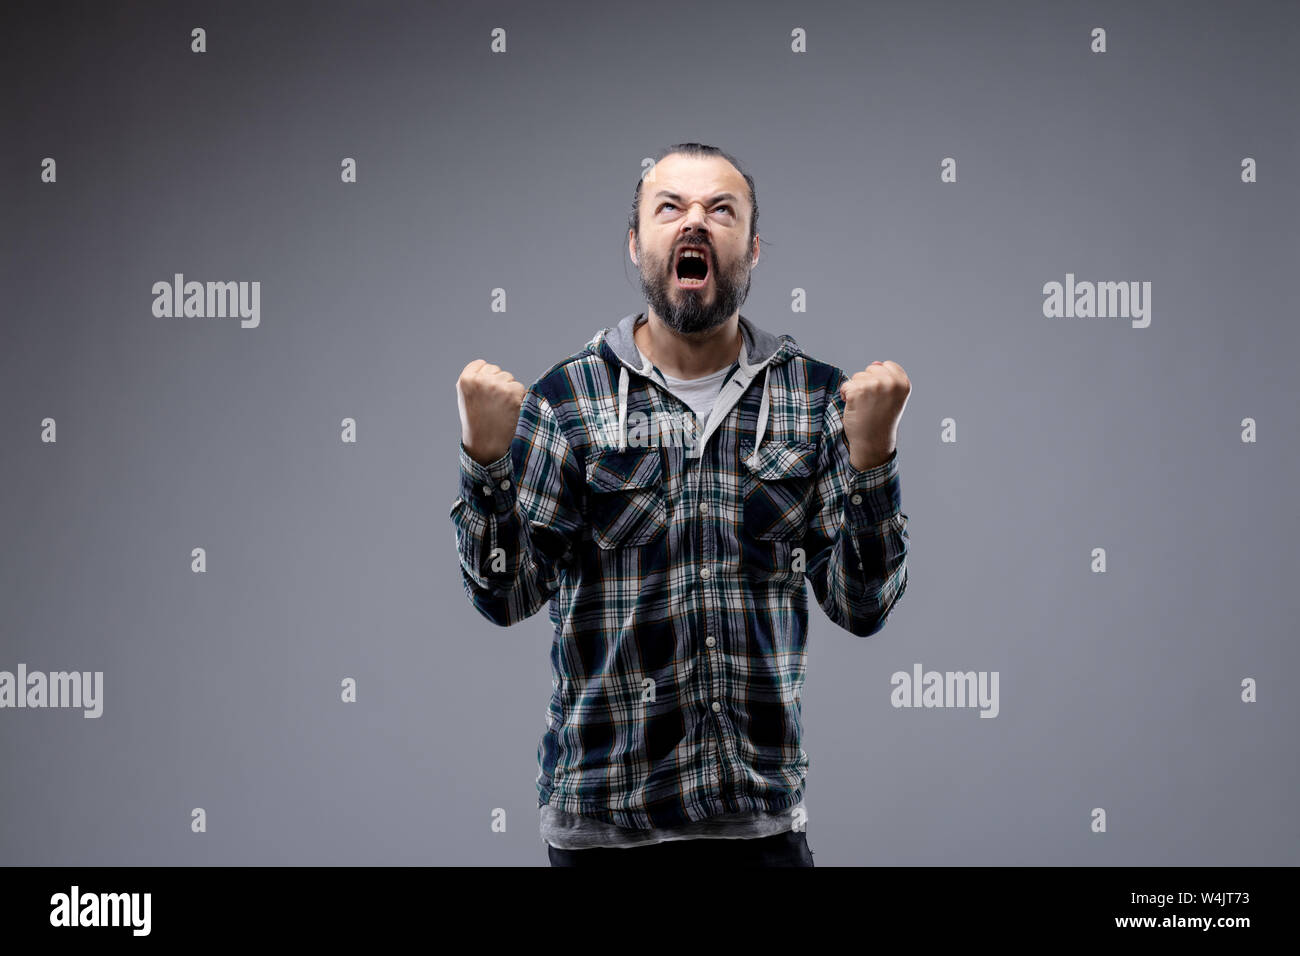 Angry man throwing a temper tantrum clenching his fists and yelling into the air with an expression of fury isolated on grey with copy space Stock Photo